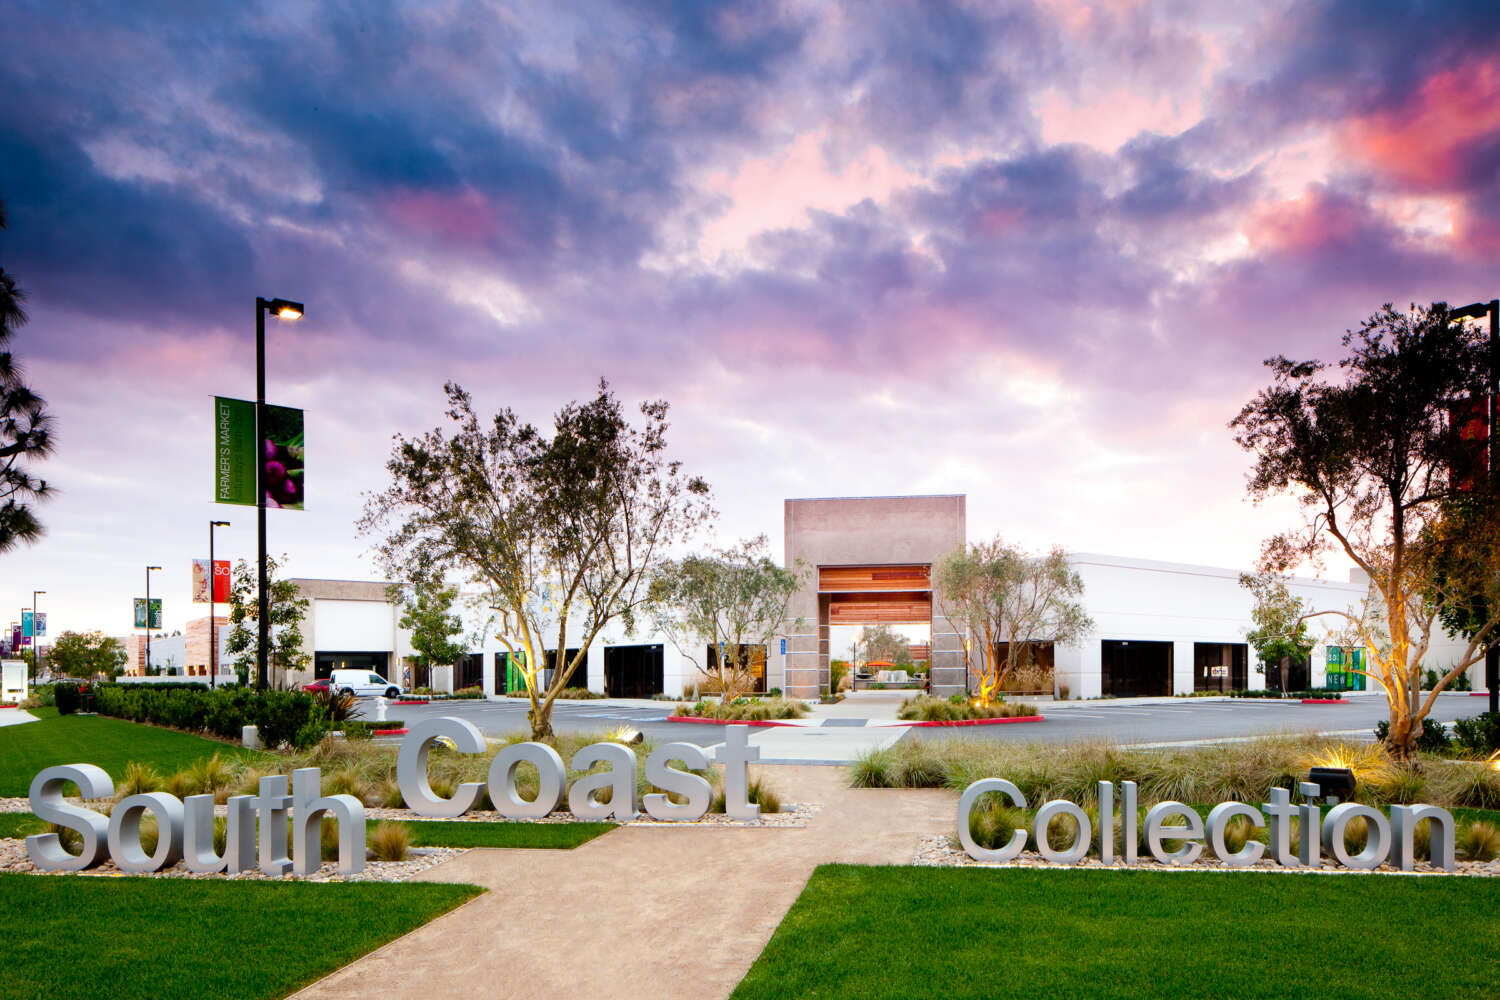 CRC Enters California Retail Market With Acquisition of The South Coast Collection In Costa Mesa